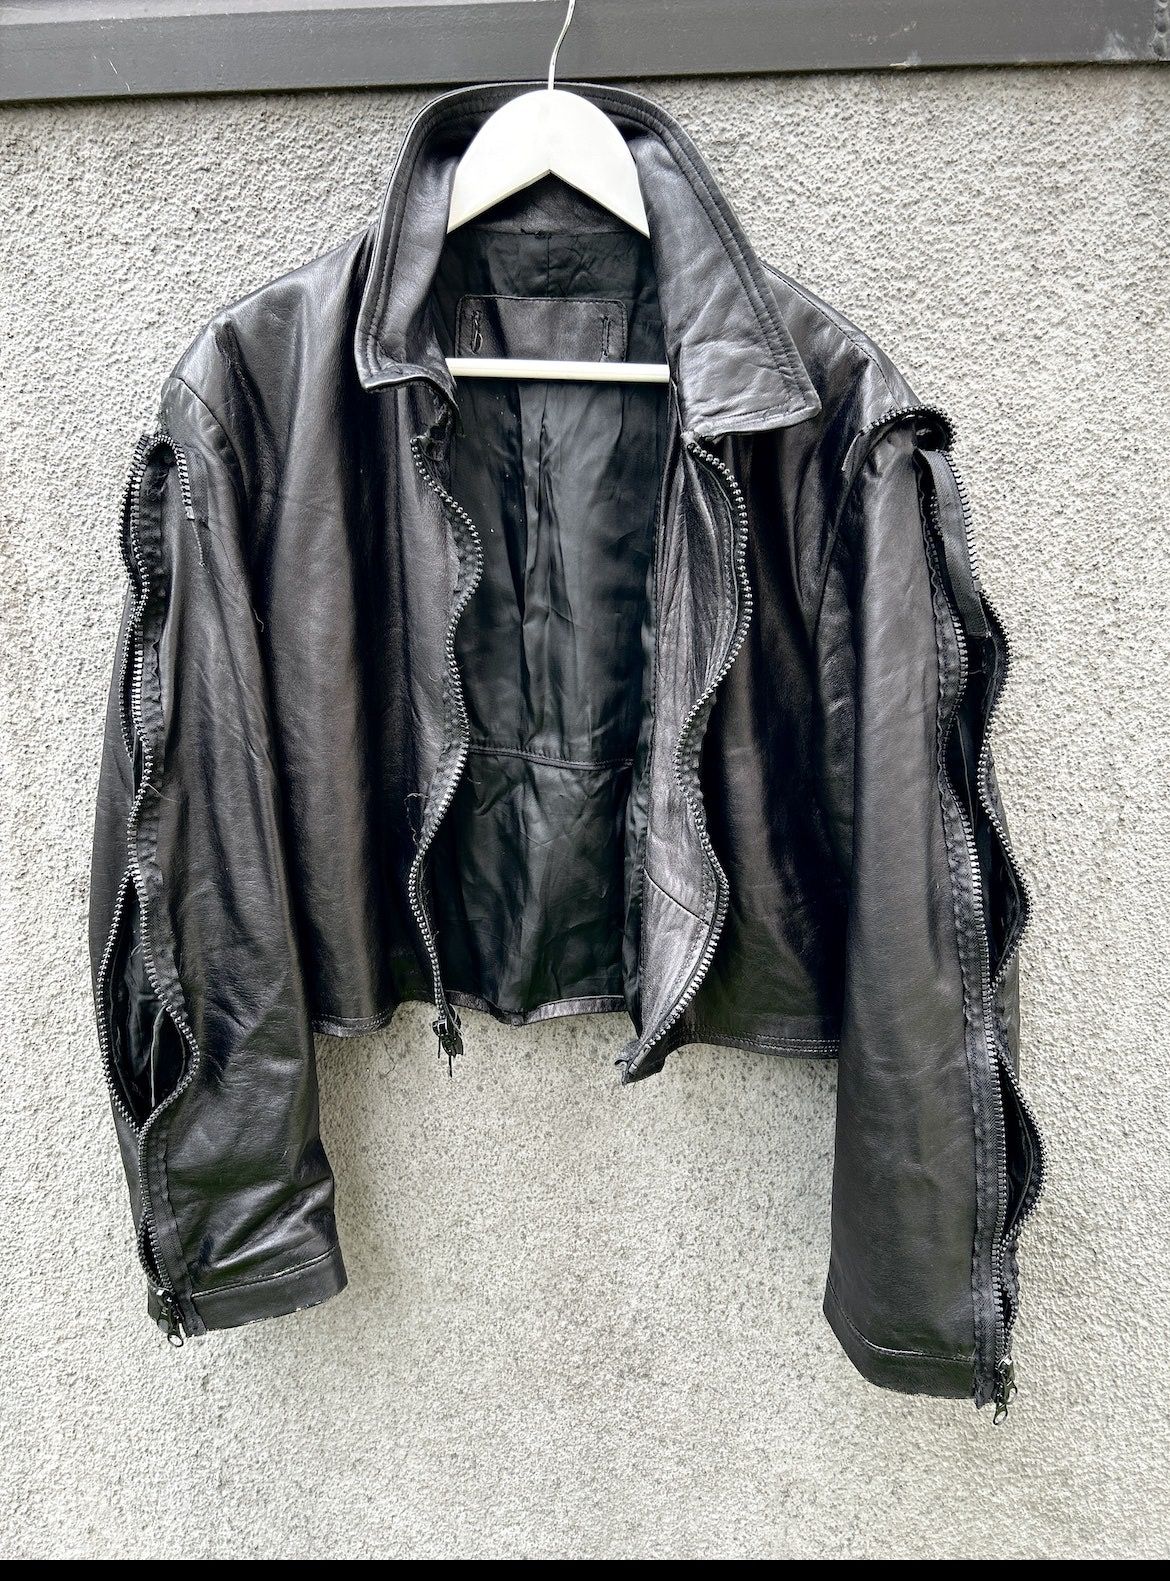 Vintage Avant Garde Archival Clothing Cropped Zip Up Leather Jacket Size US L / EU 52-54 / 3 - 1 Preview